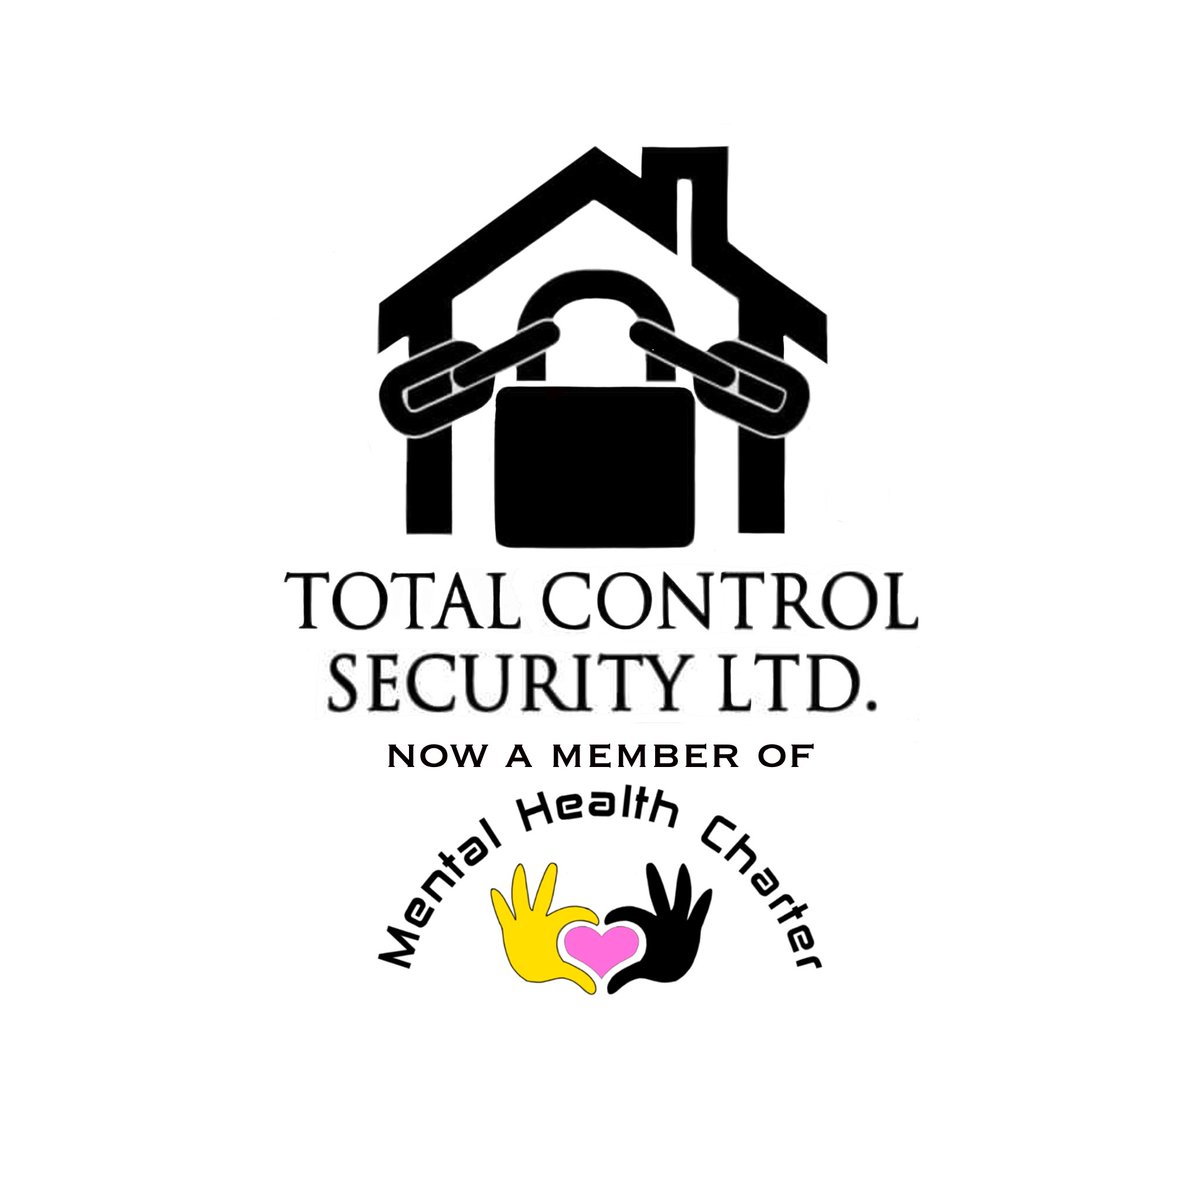 Welcome new member!
We are so pleased to announce that Total Control Security Ltd  have signed the Mental Health Charter to show commitment to Mental Health Awareness!
#mentalhealth #mentalhealthawarness #suicideprevention #security #stampoutthestigma #securityworkers